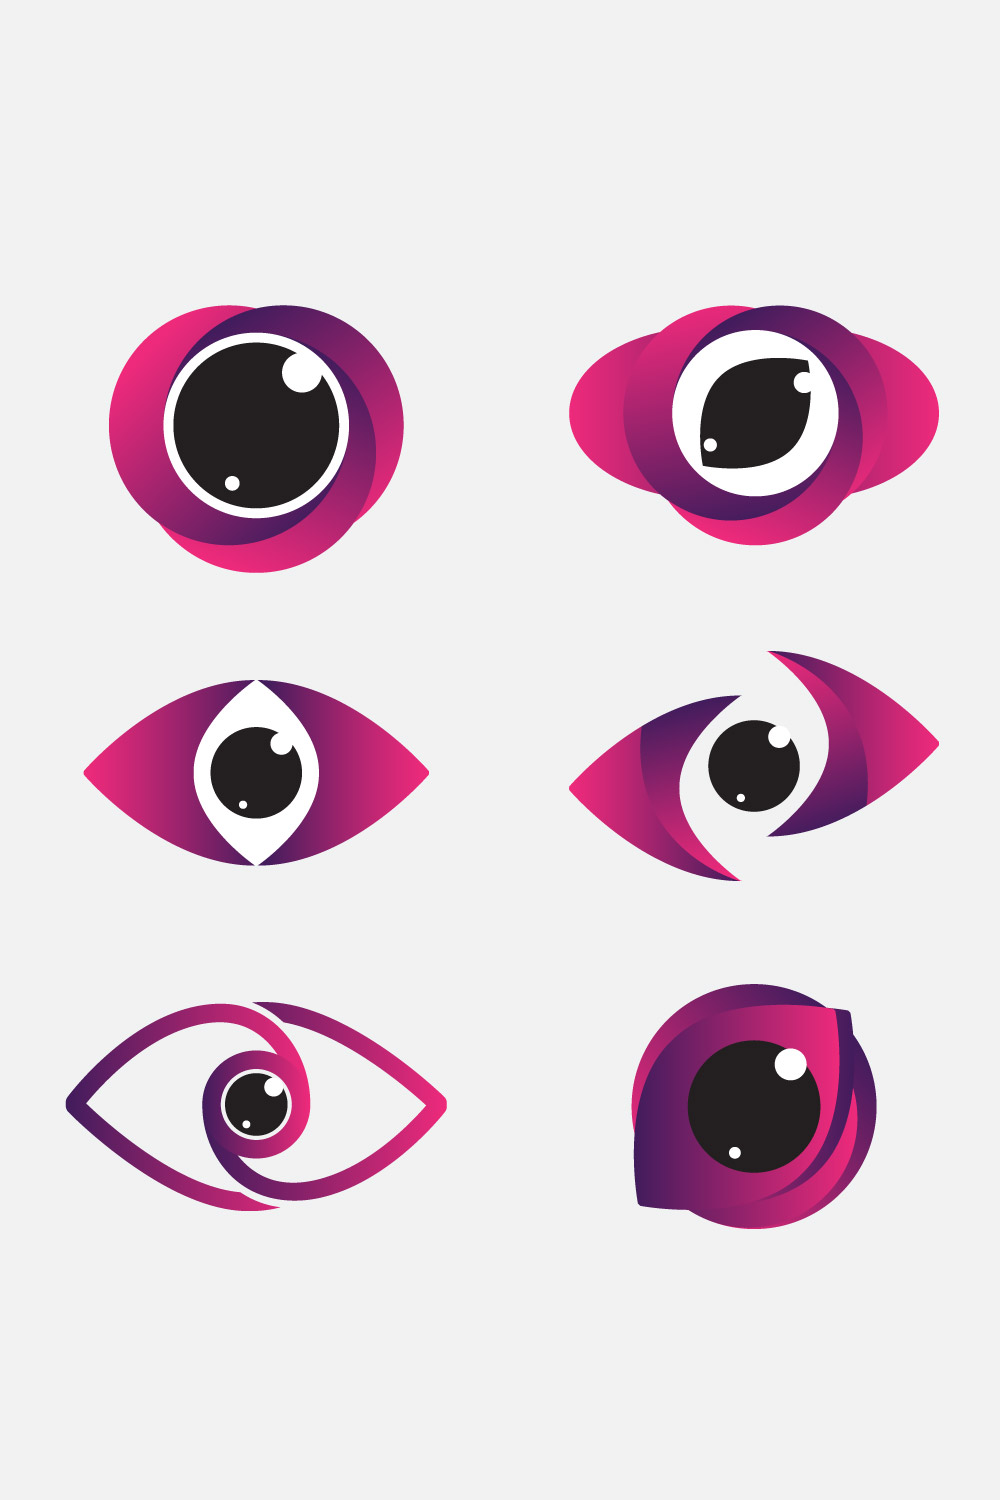 Abstract Vector 6 Eye Logo Bundle Different Eyes Icon Set pinterest preview image.